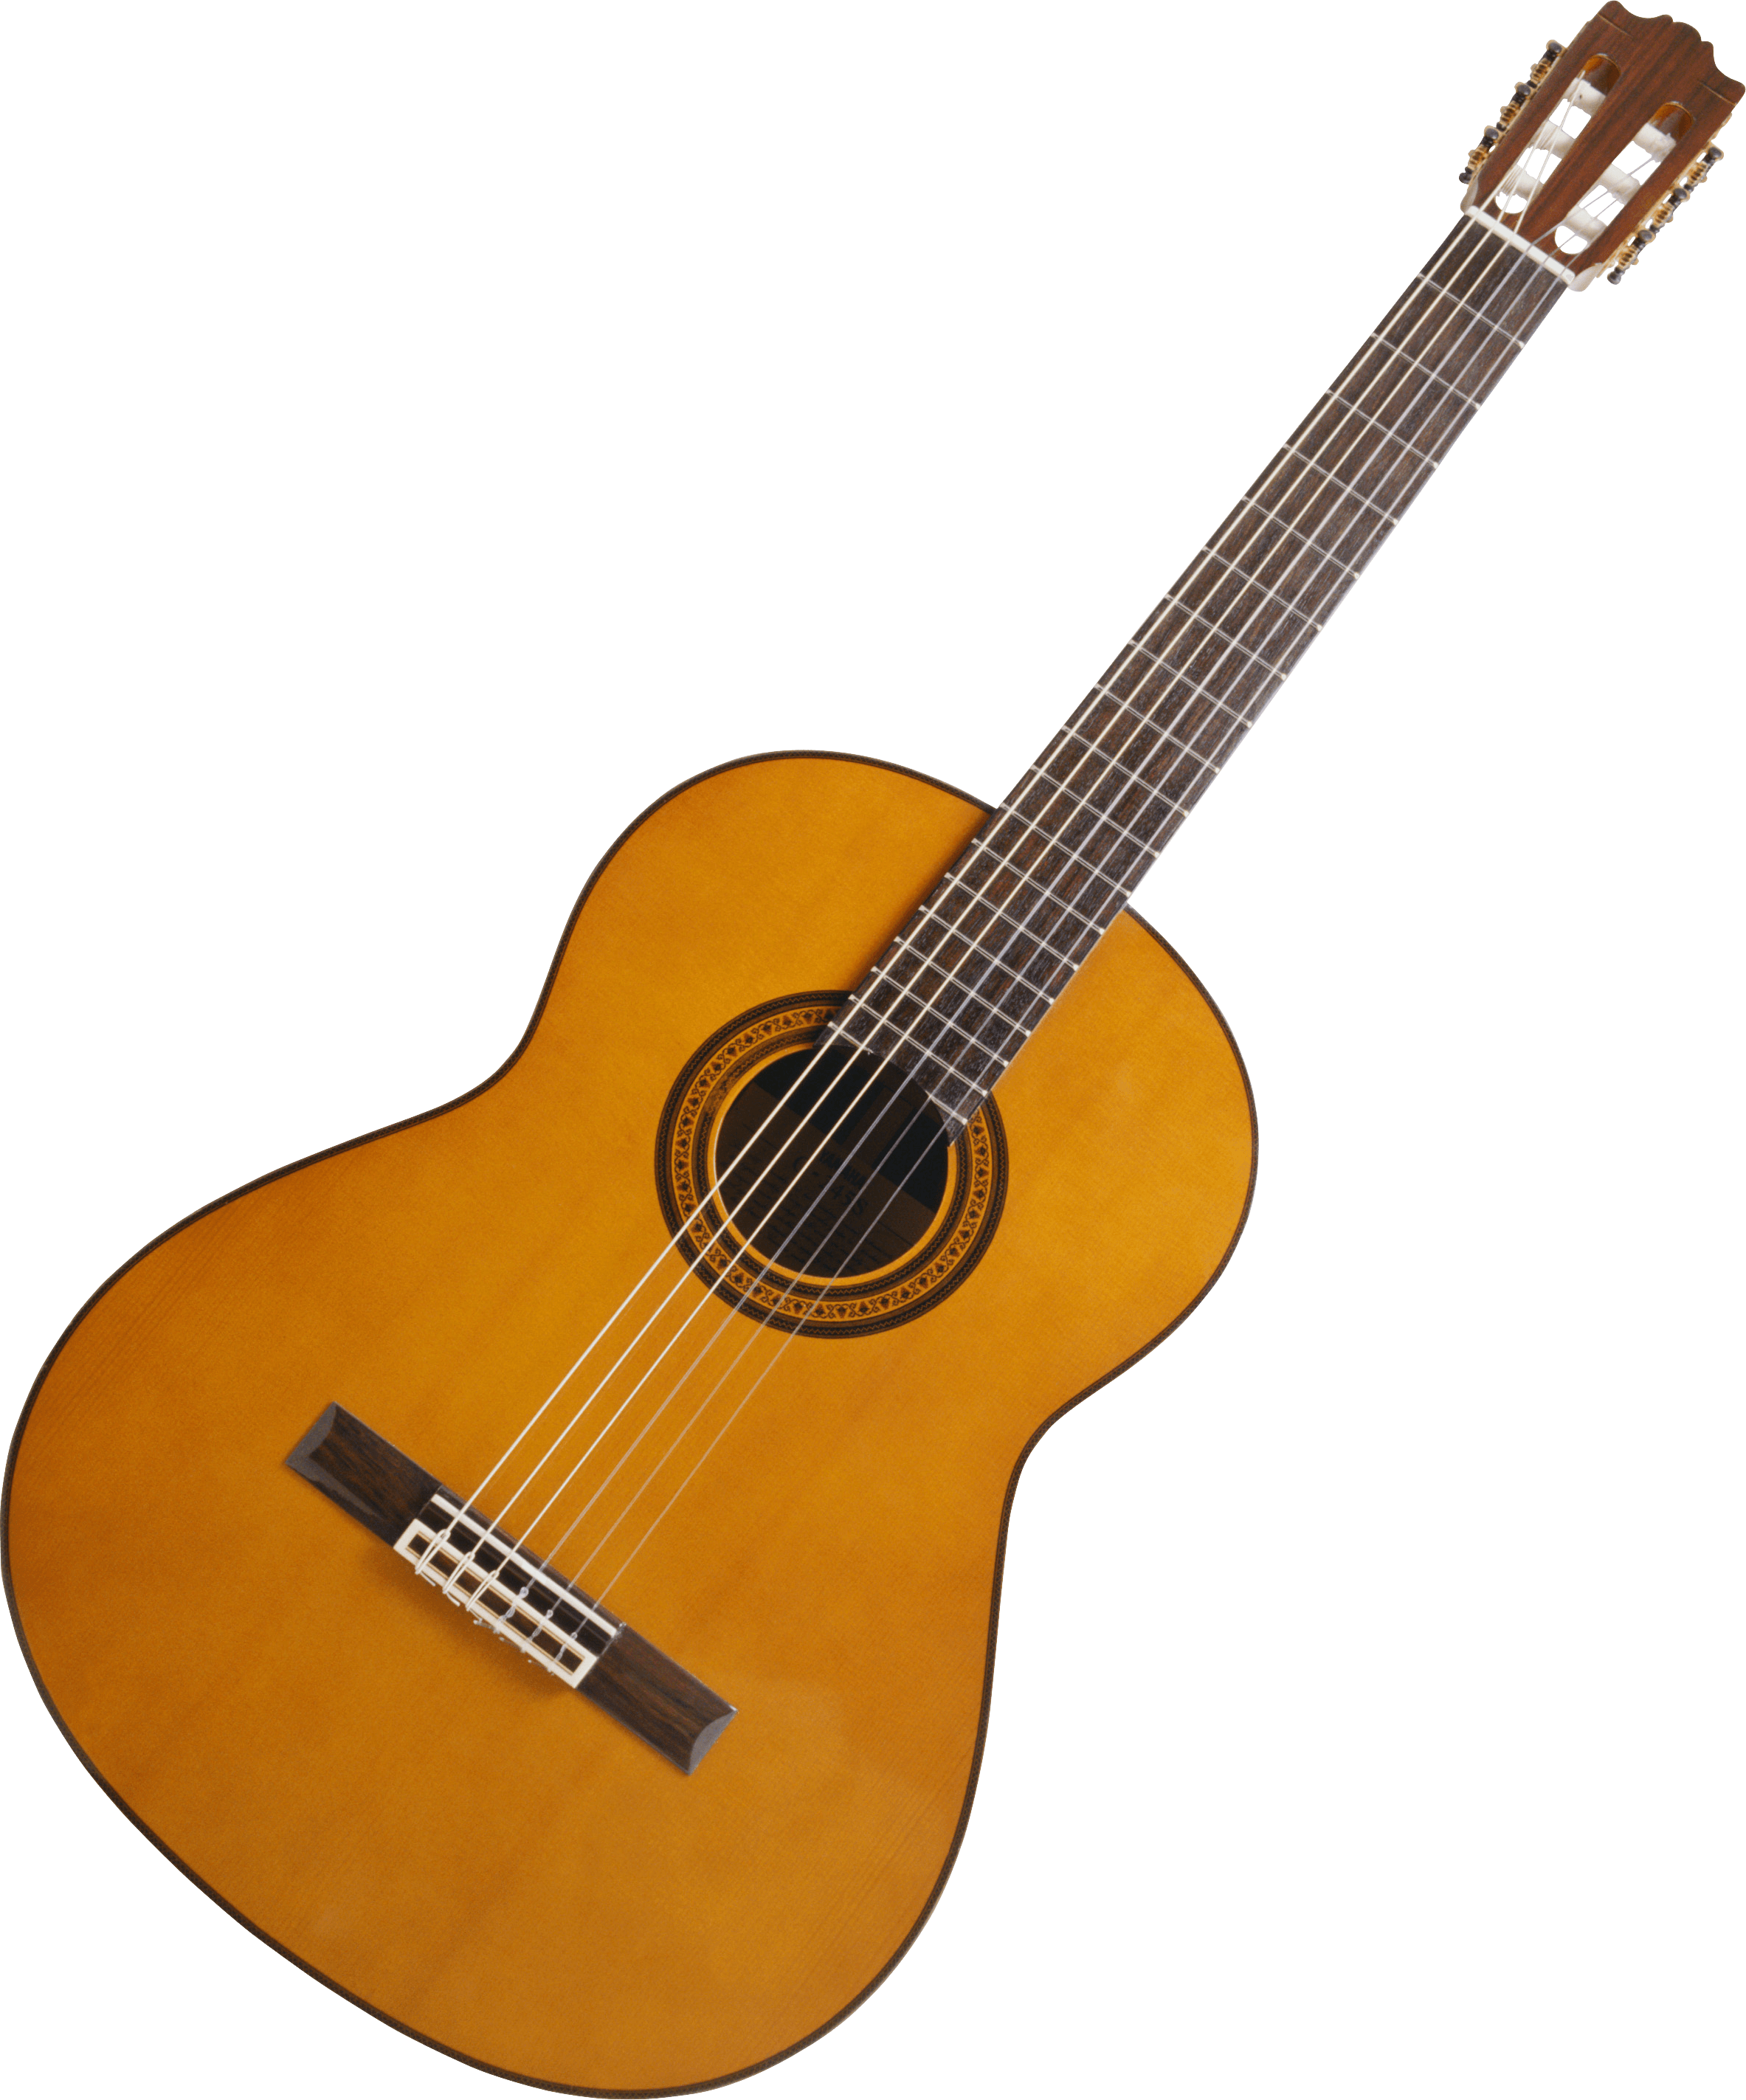 Acoustic Wooden Guitar Png Image PNG Image